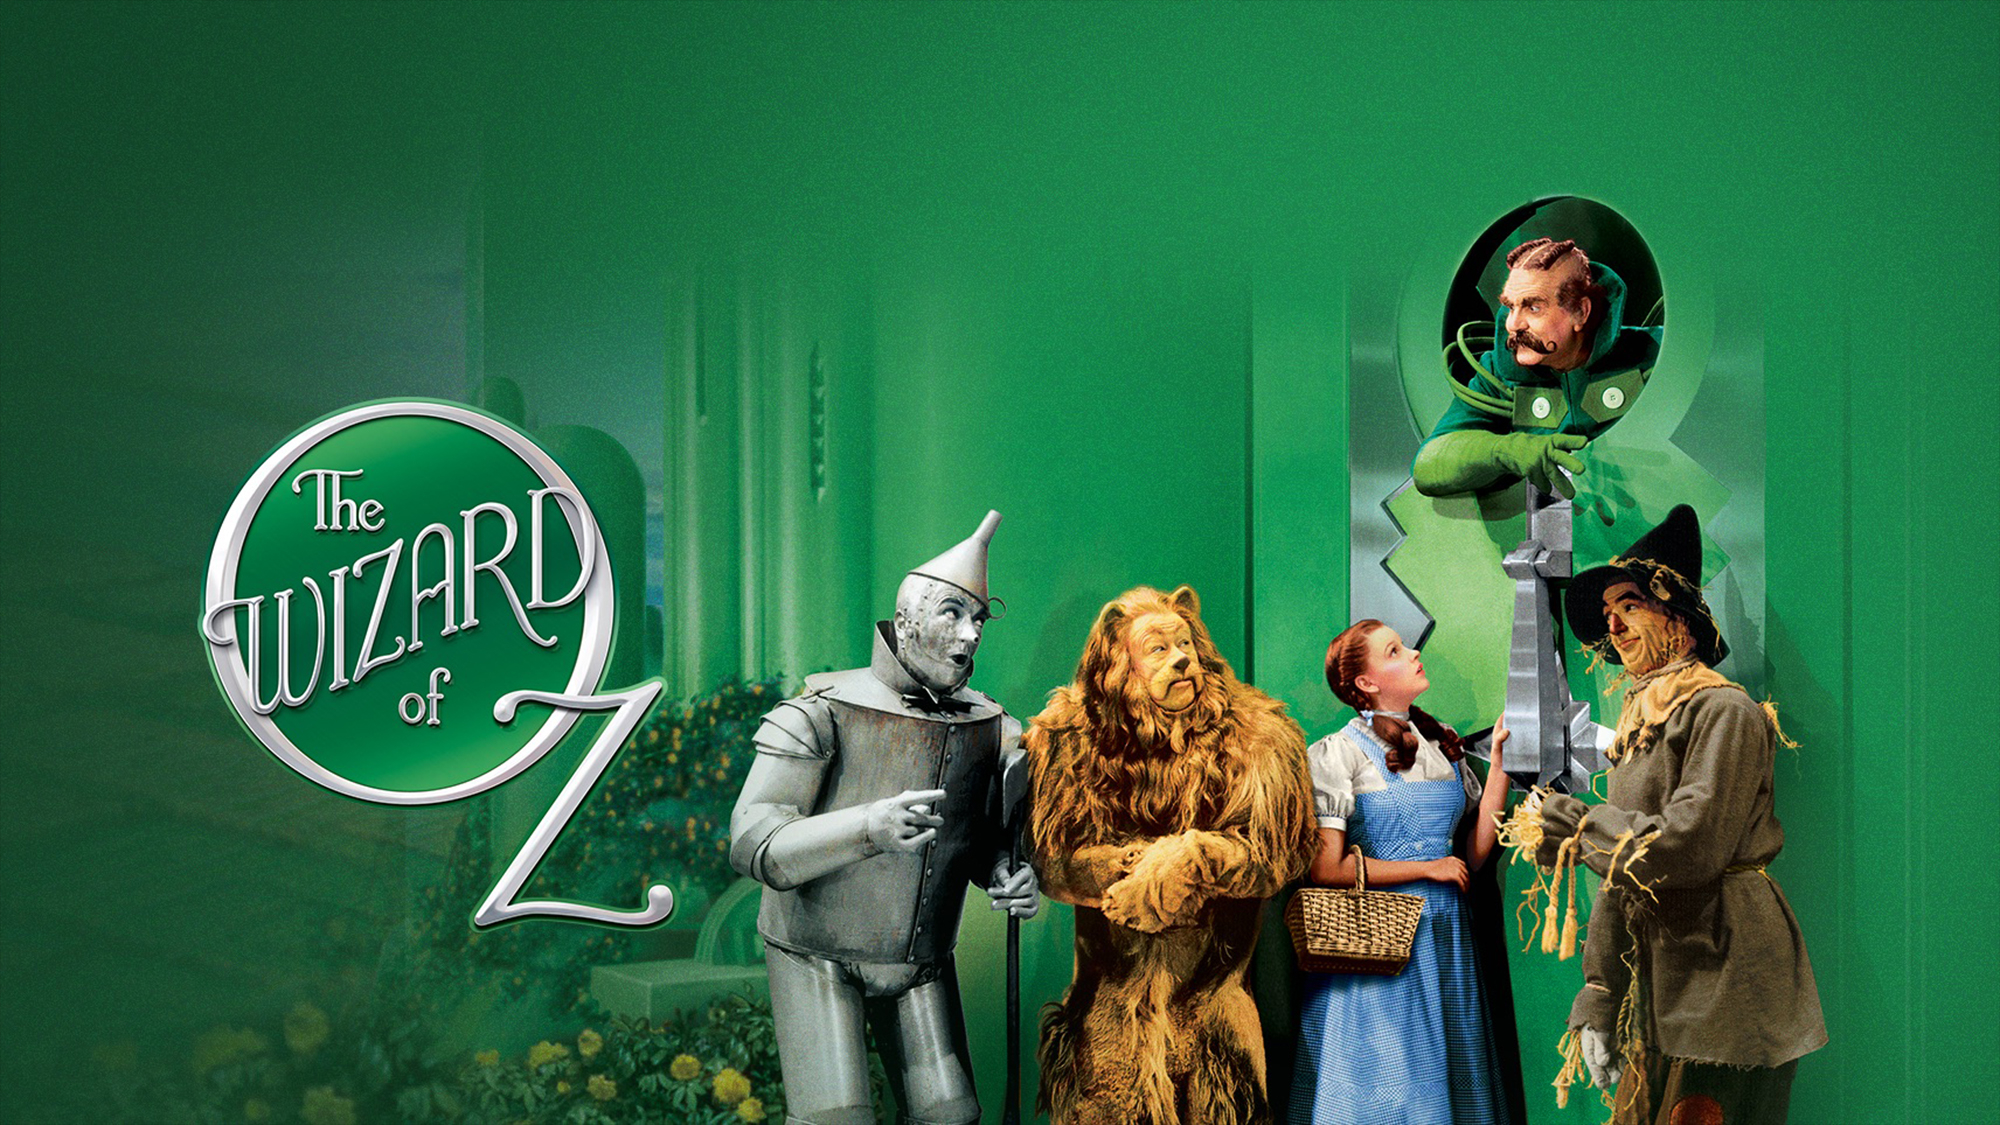 2000x1125 80+ The Wizard Of Oz (1939) HD Wallpapers and Backgrounds